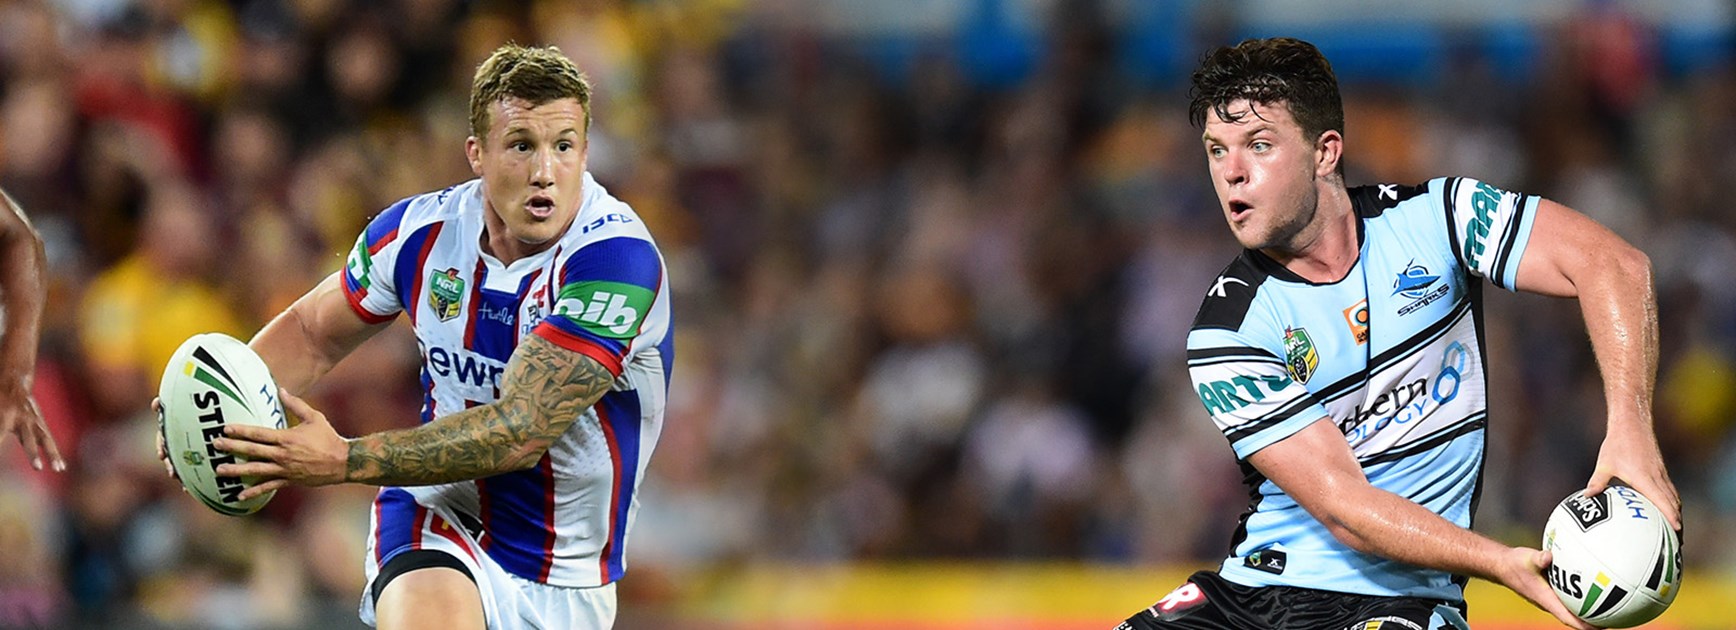 Battle of the halfbacks; Trent Hodkinson v Chad Townsend.